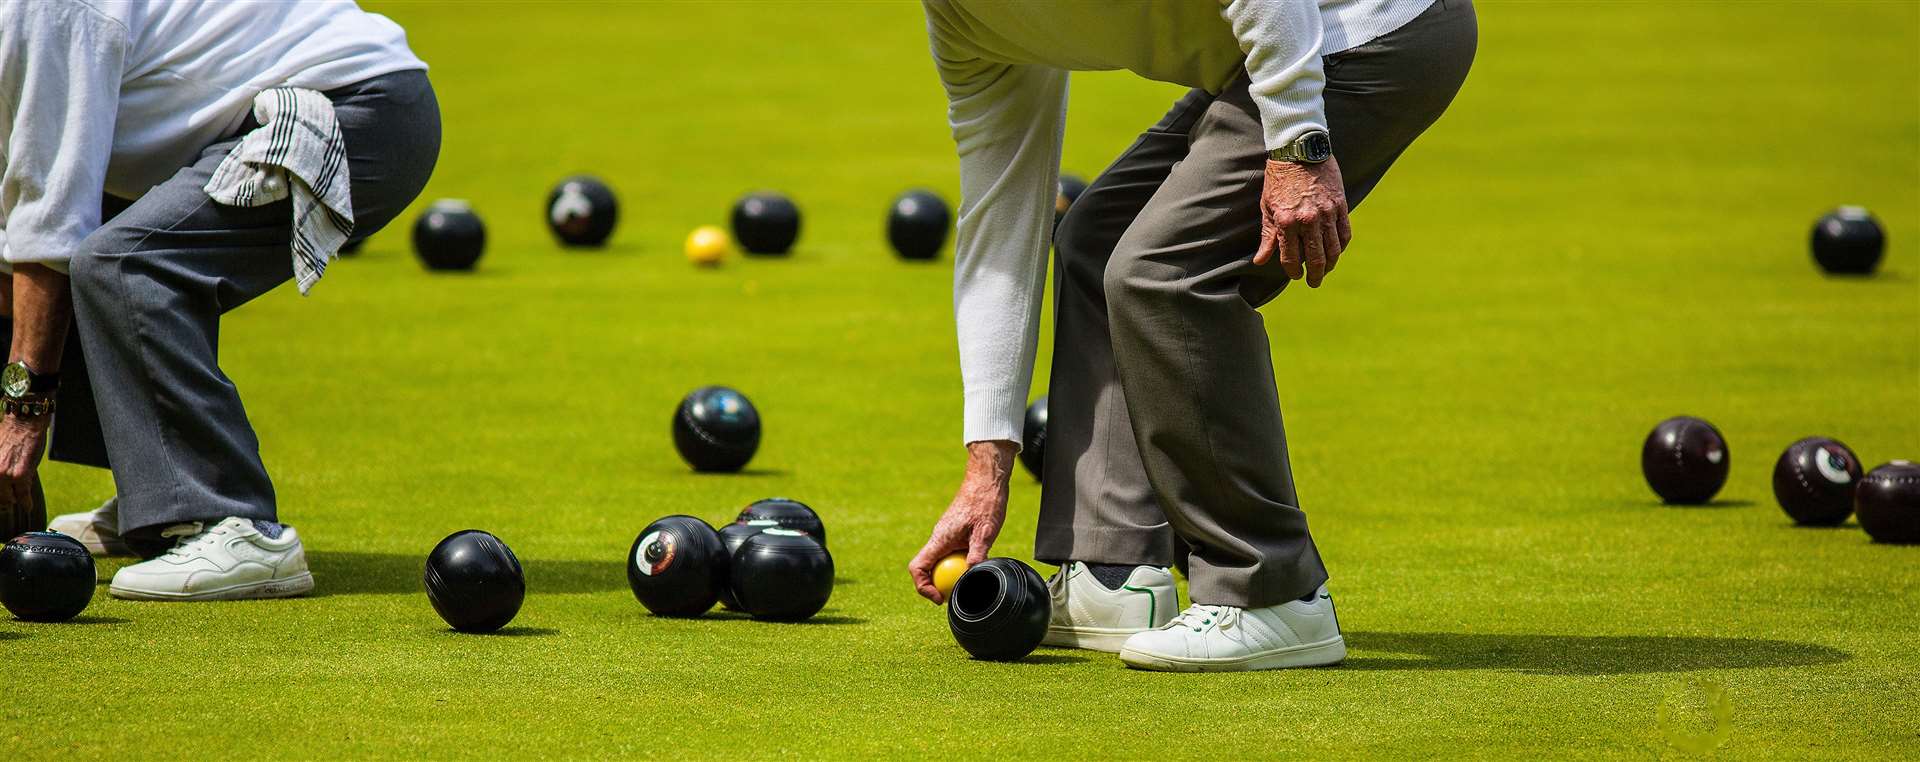 Dornoch Bowling Club is open to all ages and abilities.